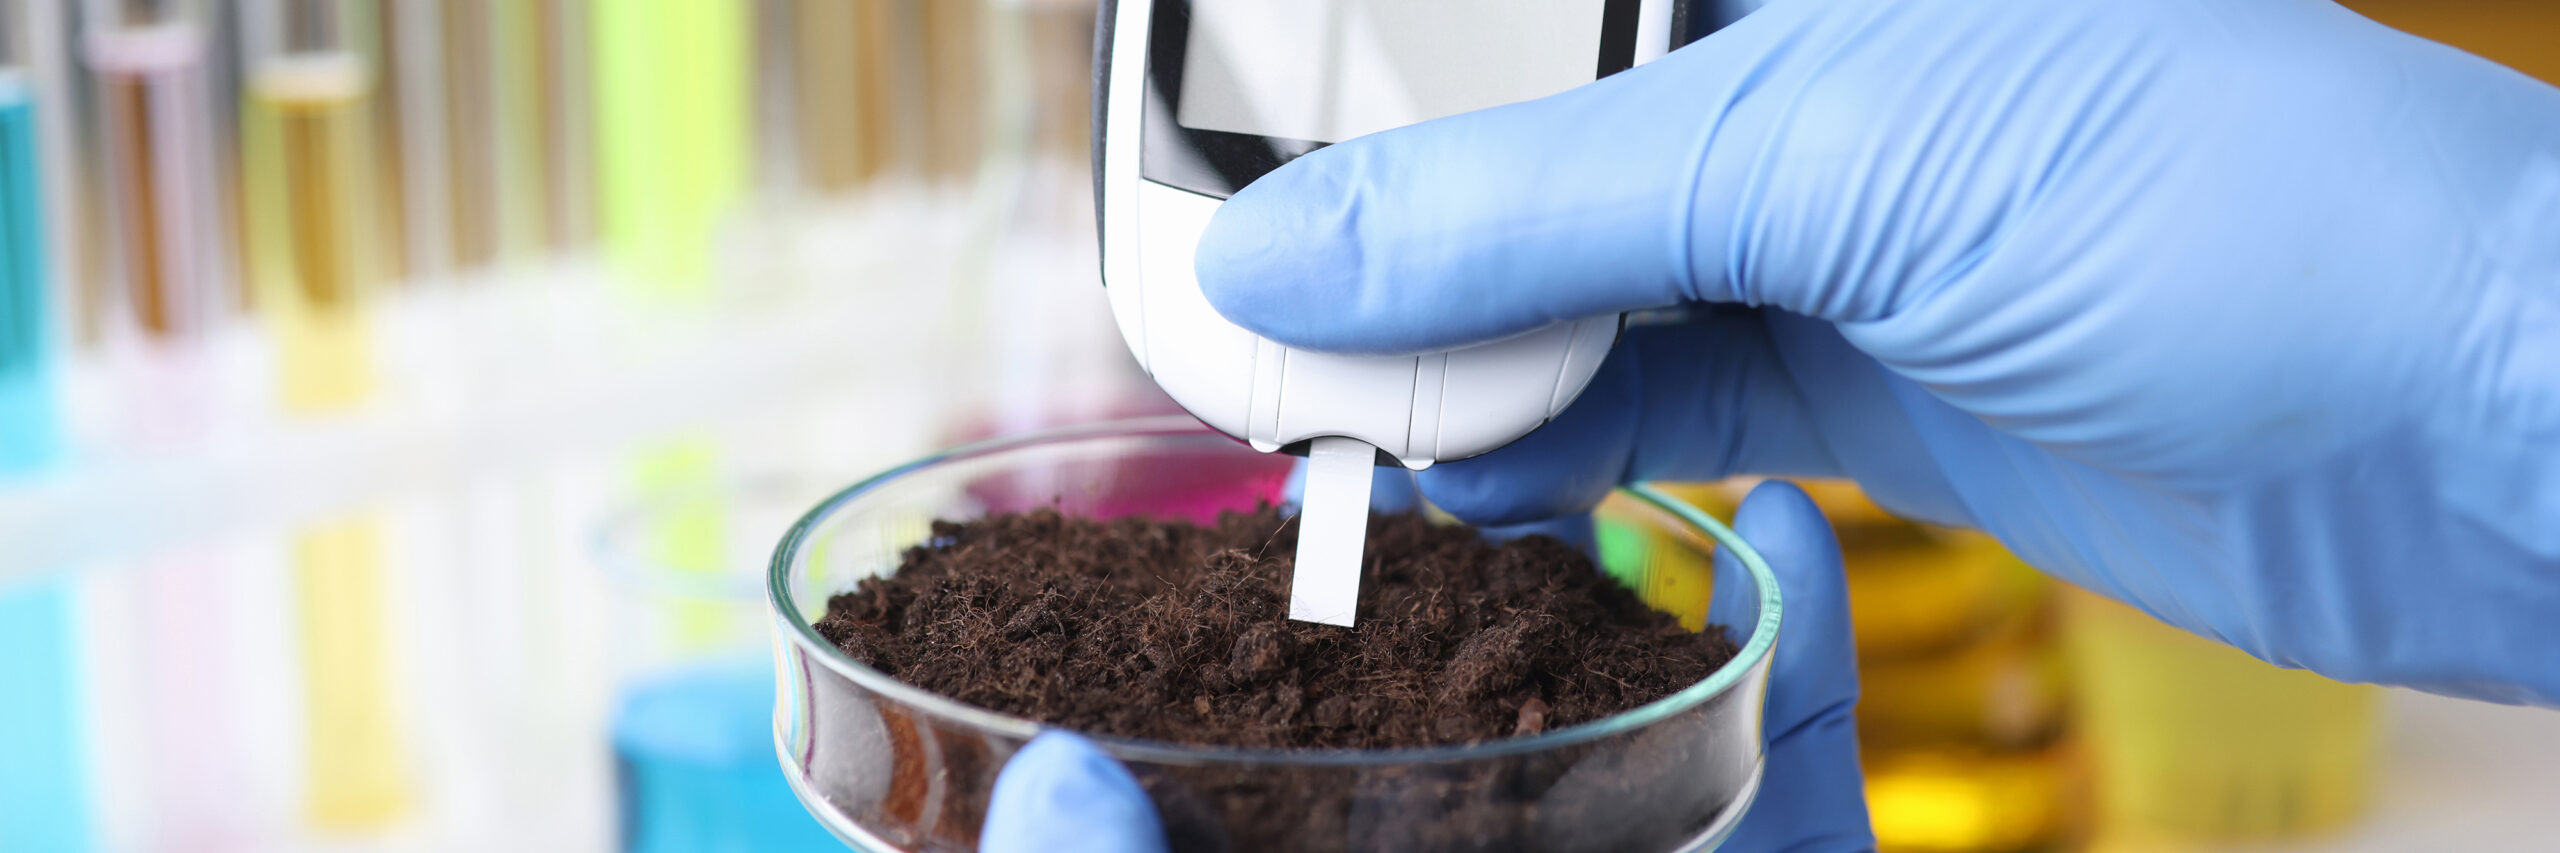 Can plant biostimulants improve microbial activity in soil?